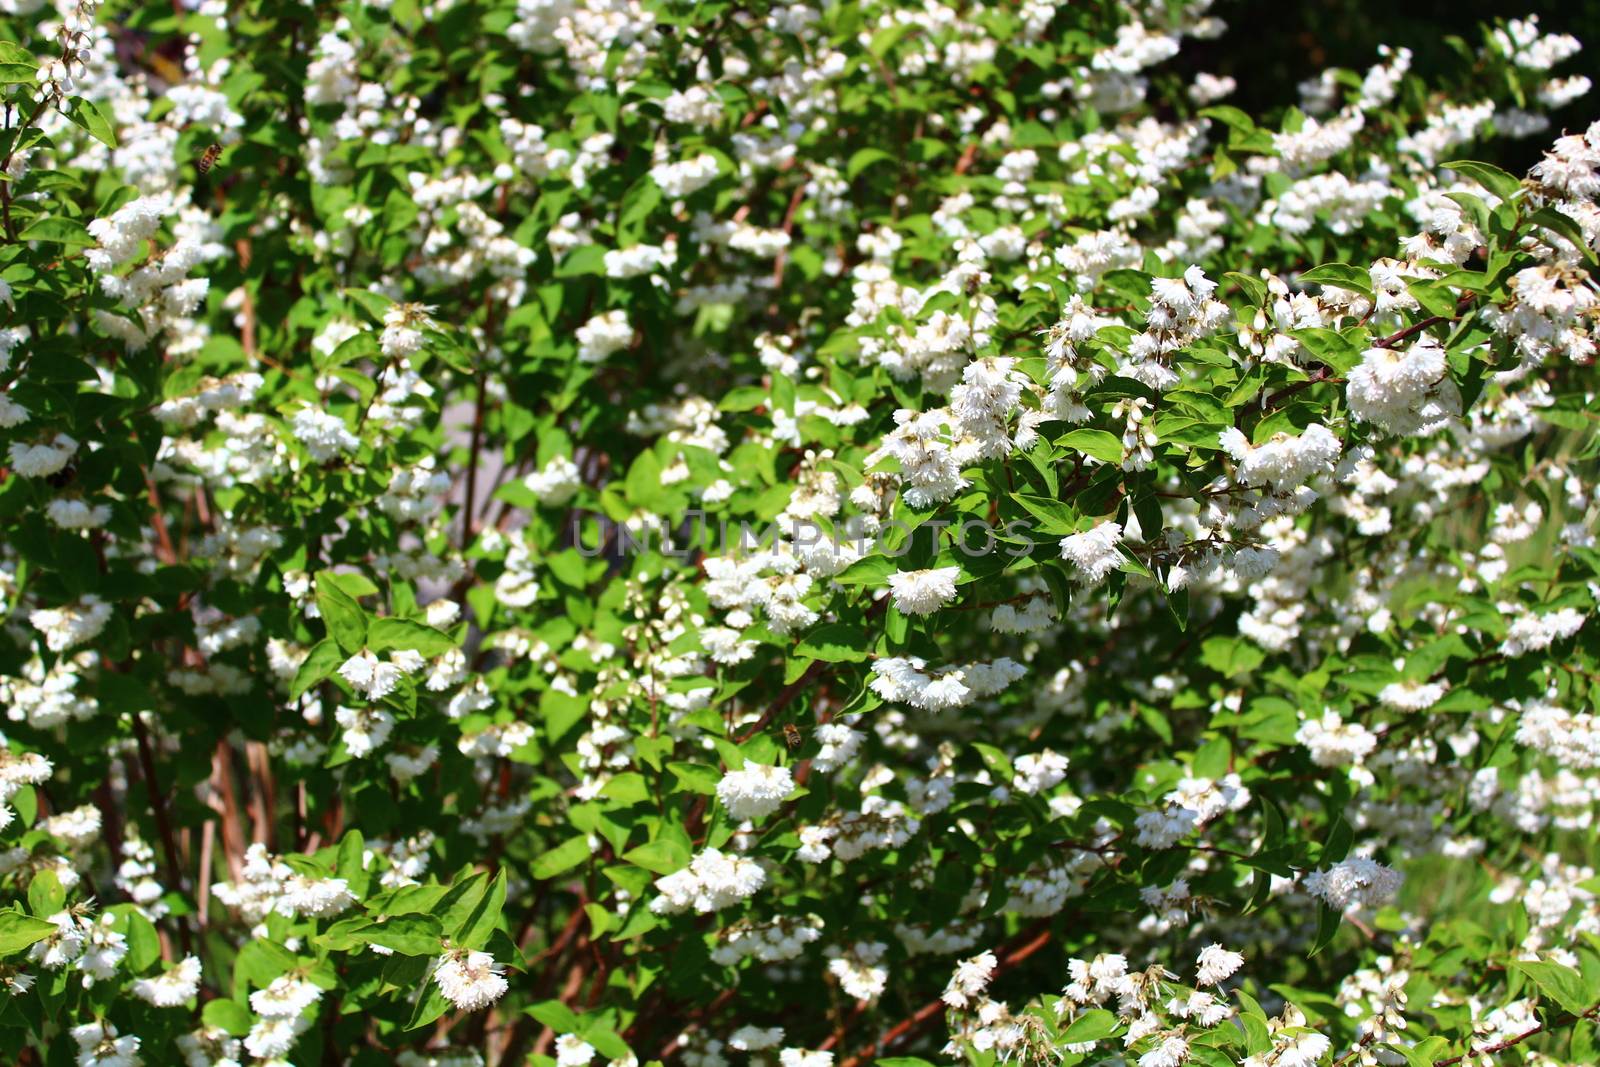 The picture shows beautiful jasmine in the garden